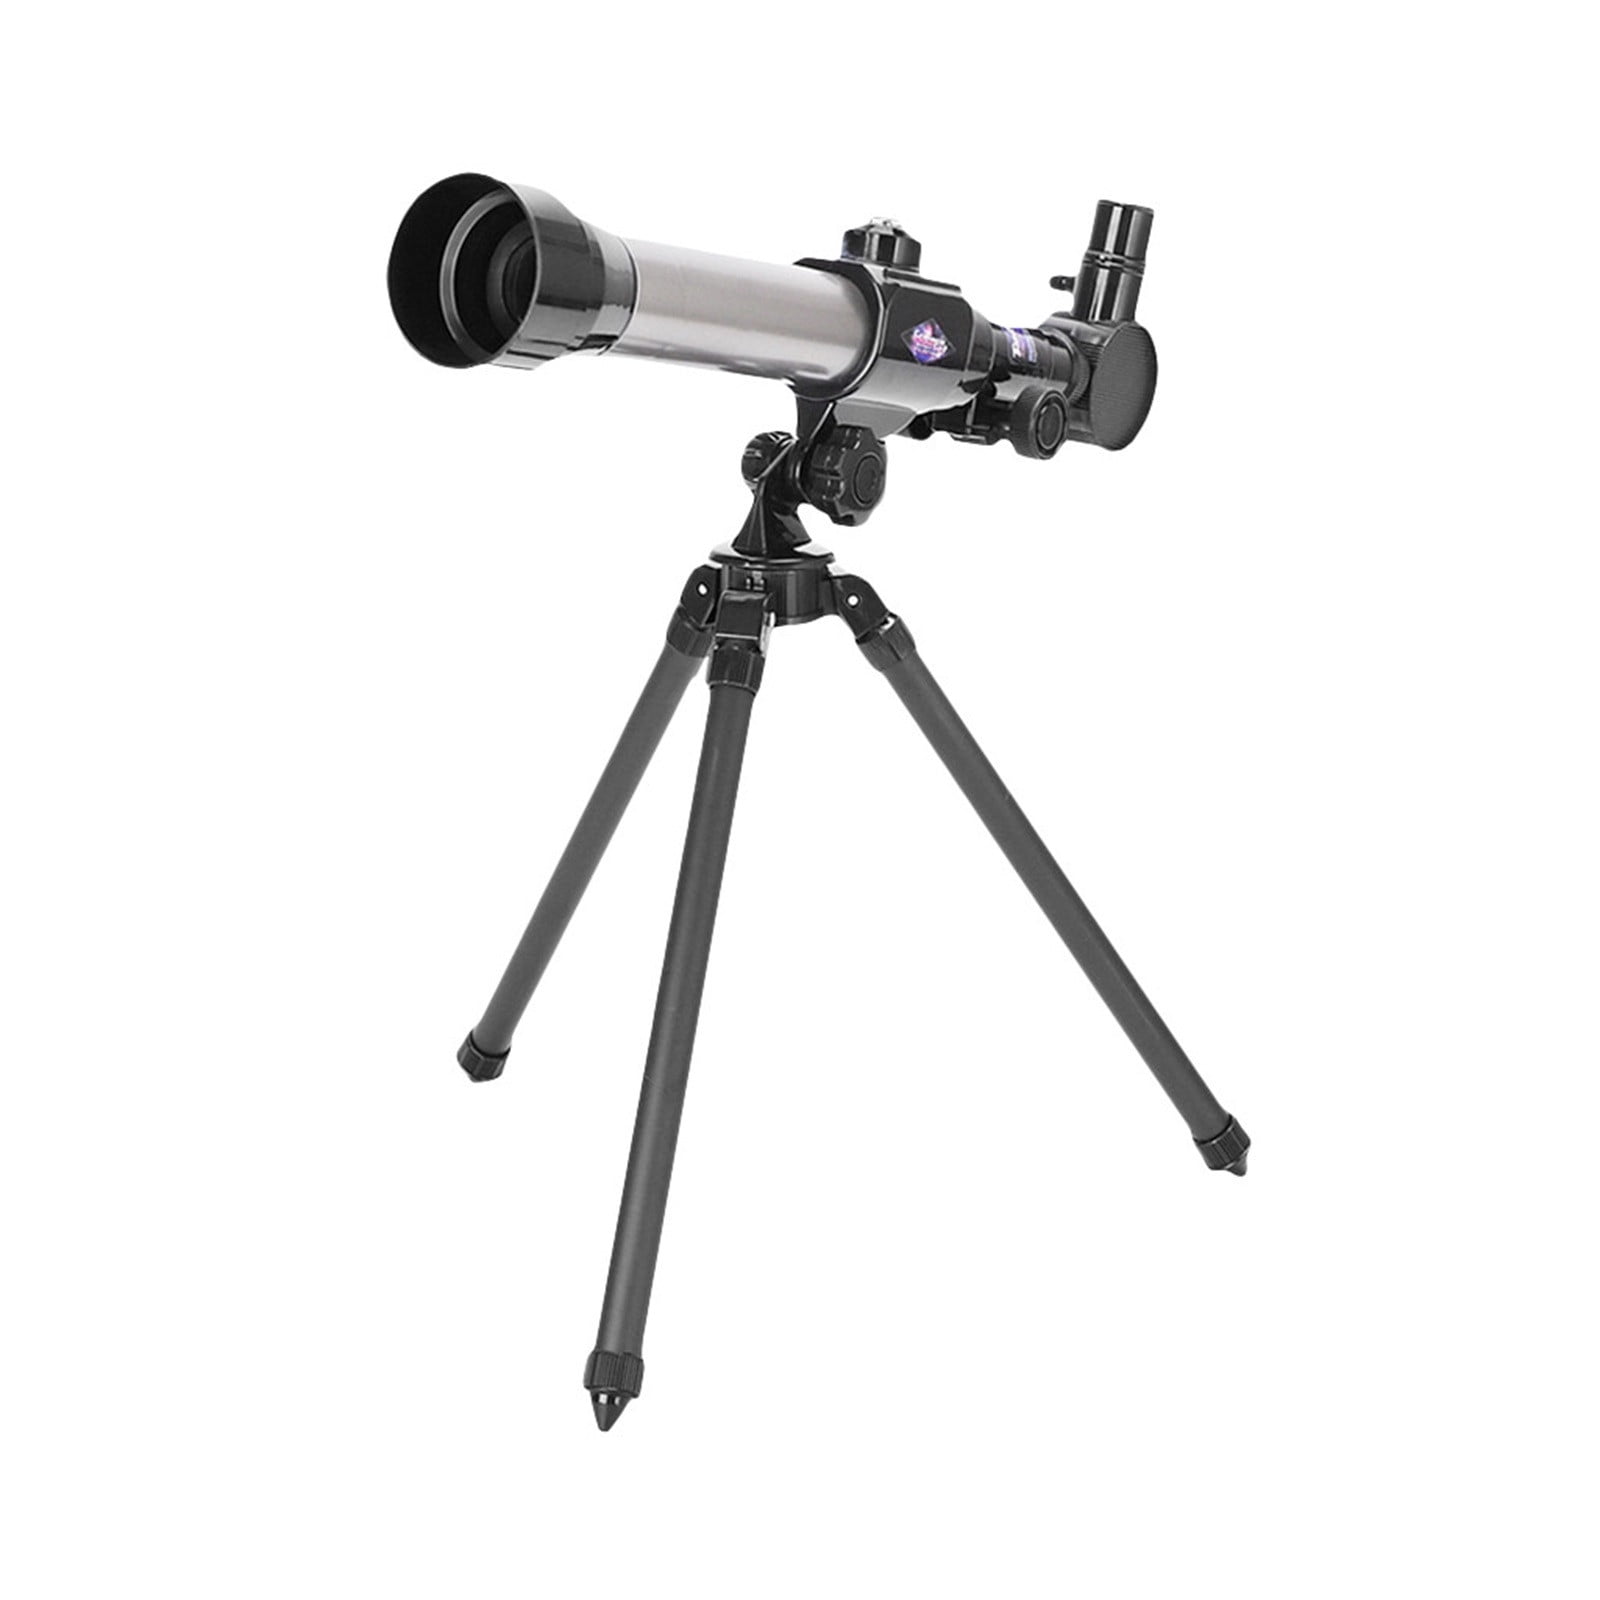 Telescope for Kids Travel Scope Educational Gift for Children & Beginners Senioroy Science Astronomical Telescope with Tripod 3 Eyepieces 